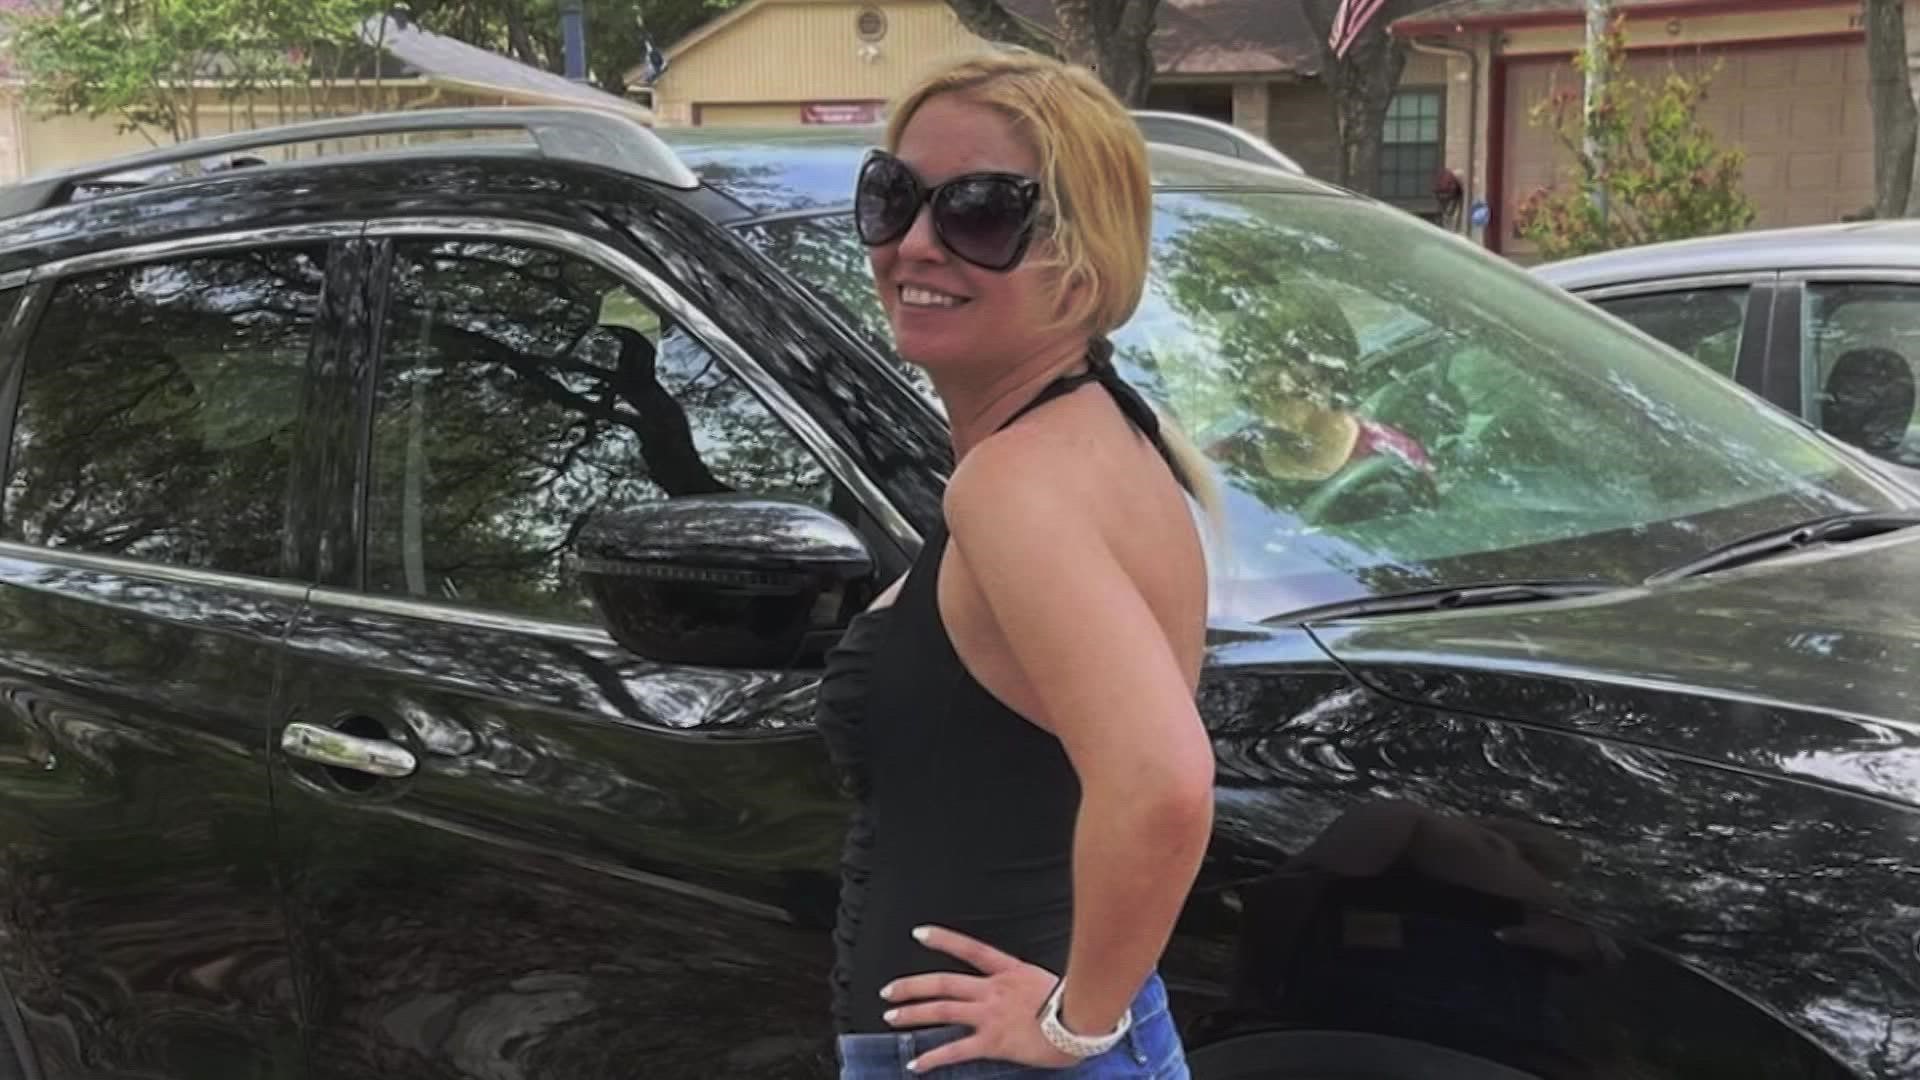 Police found Chrissy Lee Powell's car parked in a parking lot on the 11700 block of I-10 Saturday.